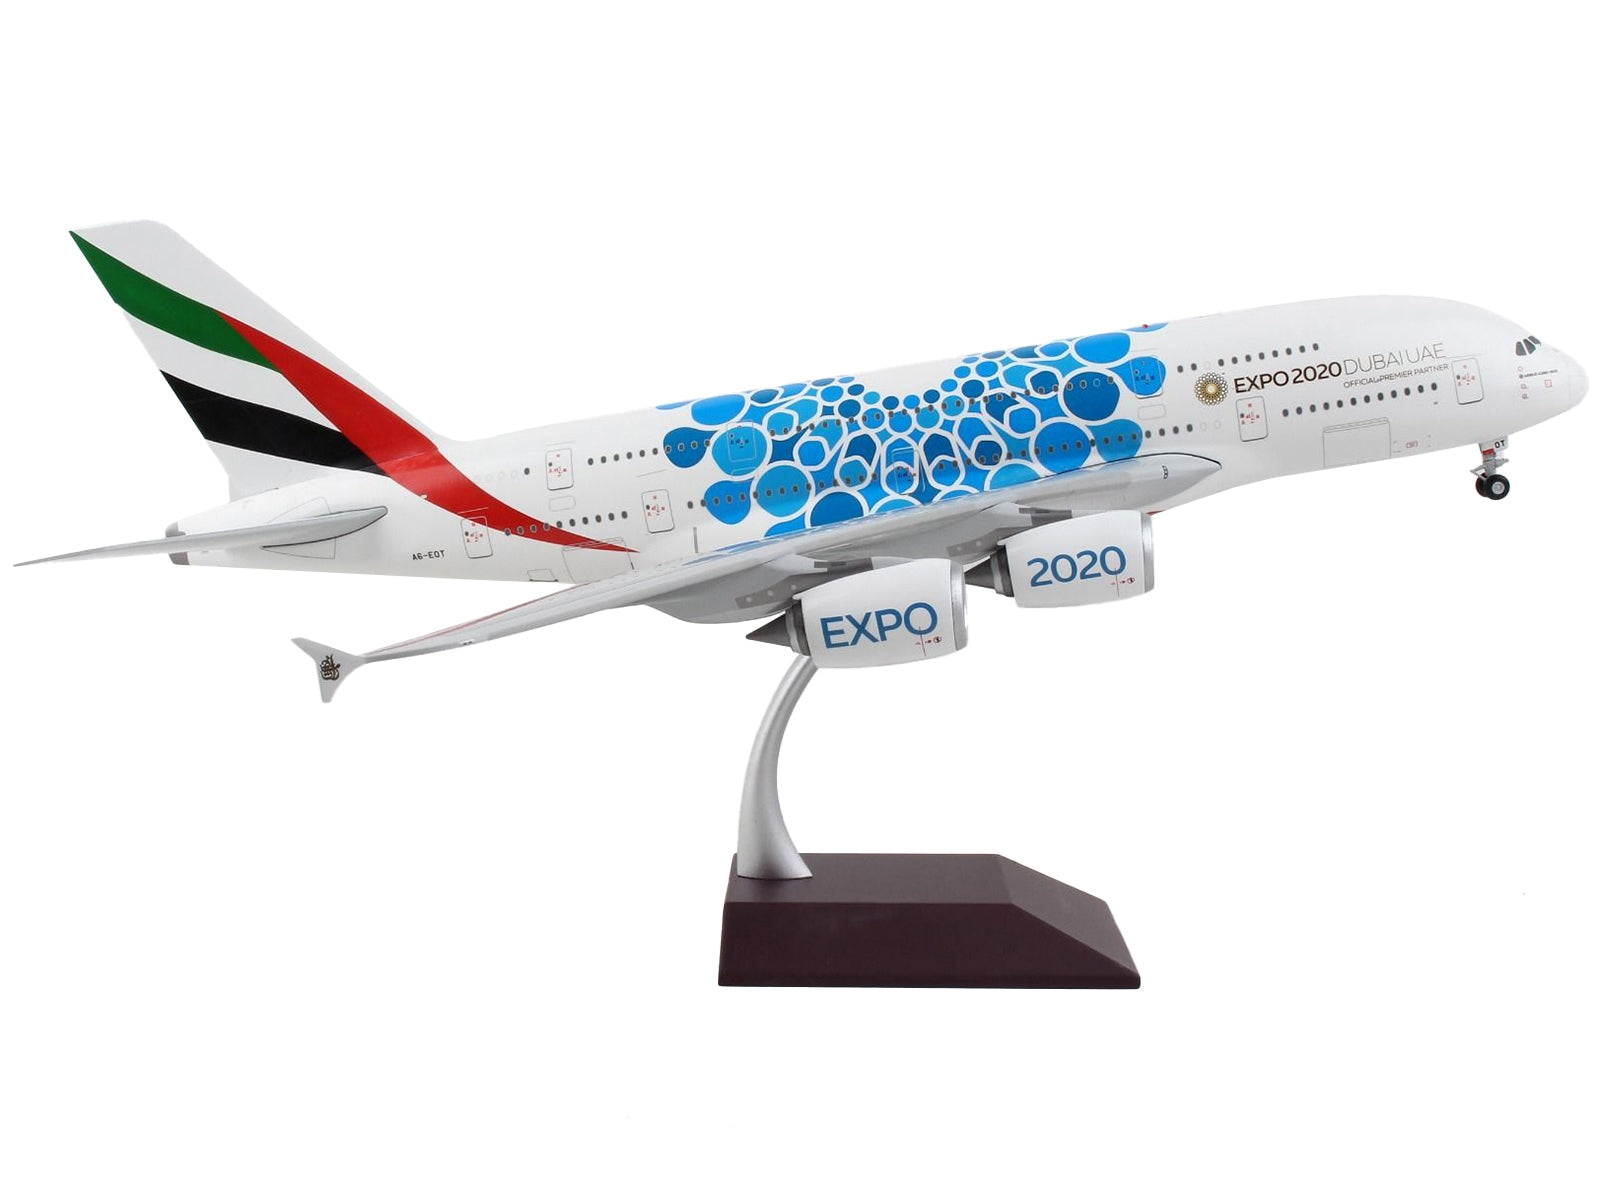 Airbus A380-800 Commercial Aircraft "Emirates Airlines - Dubai Expo 2020" White with Blue Graphics